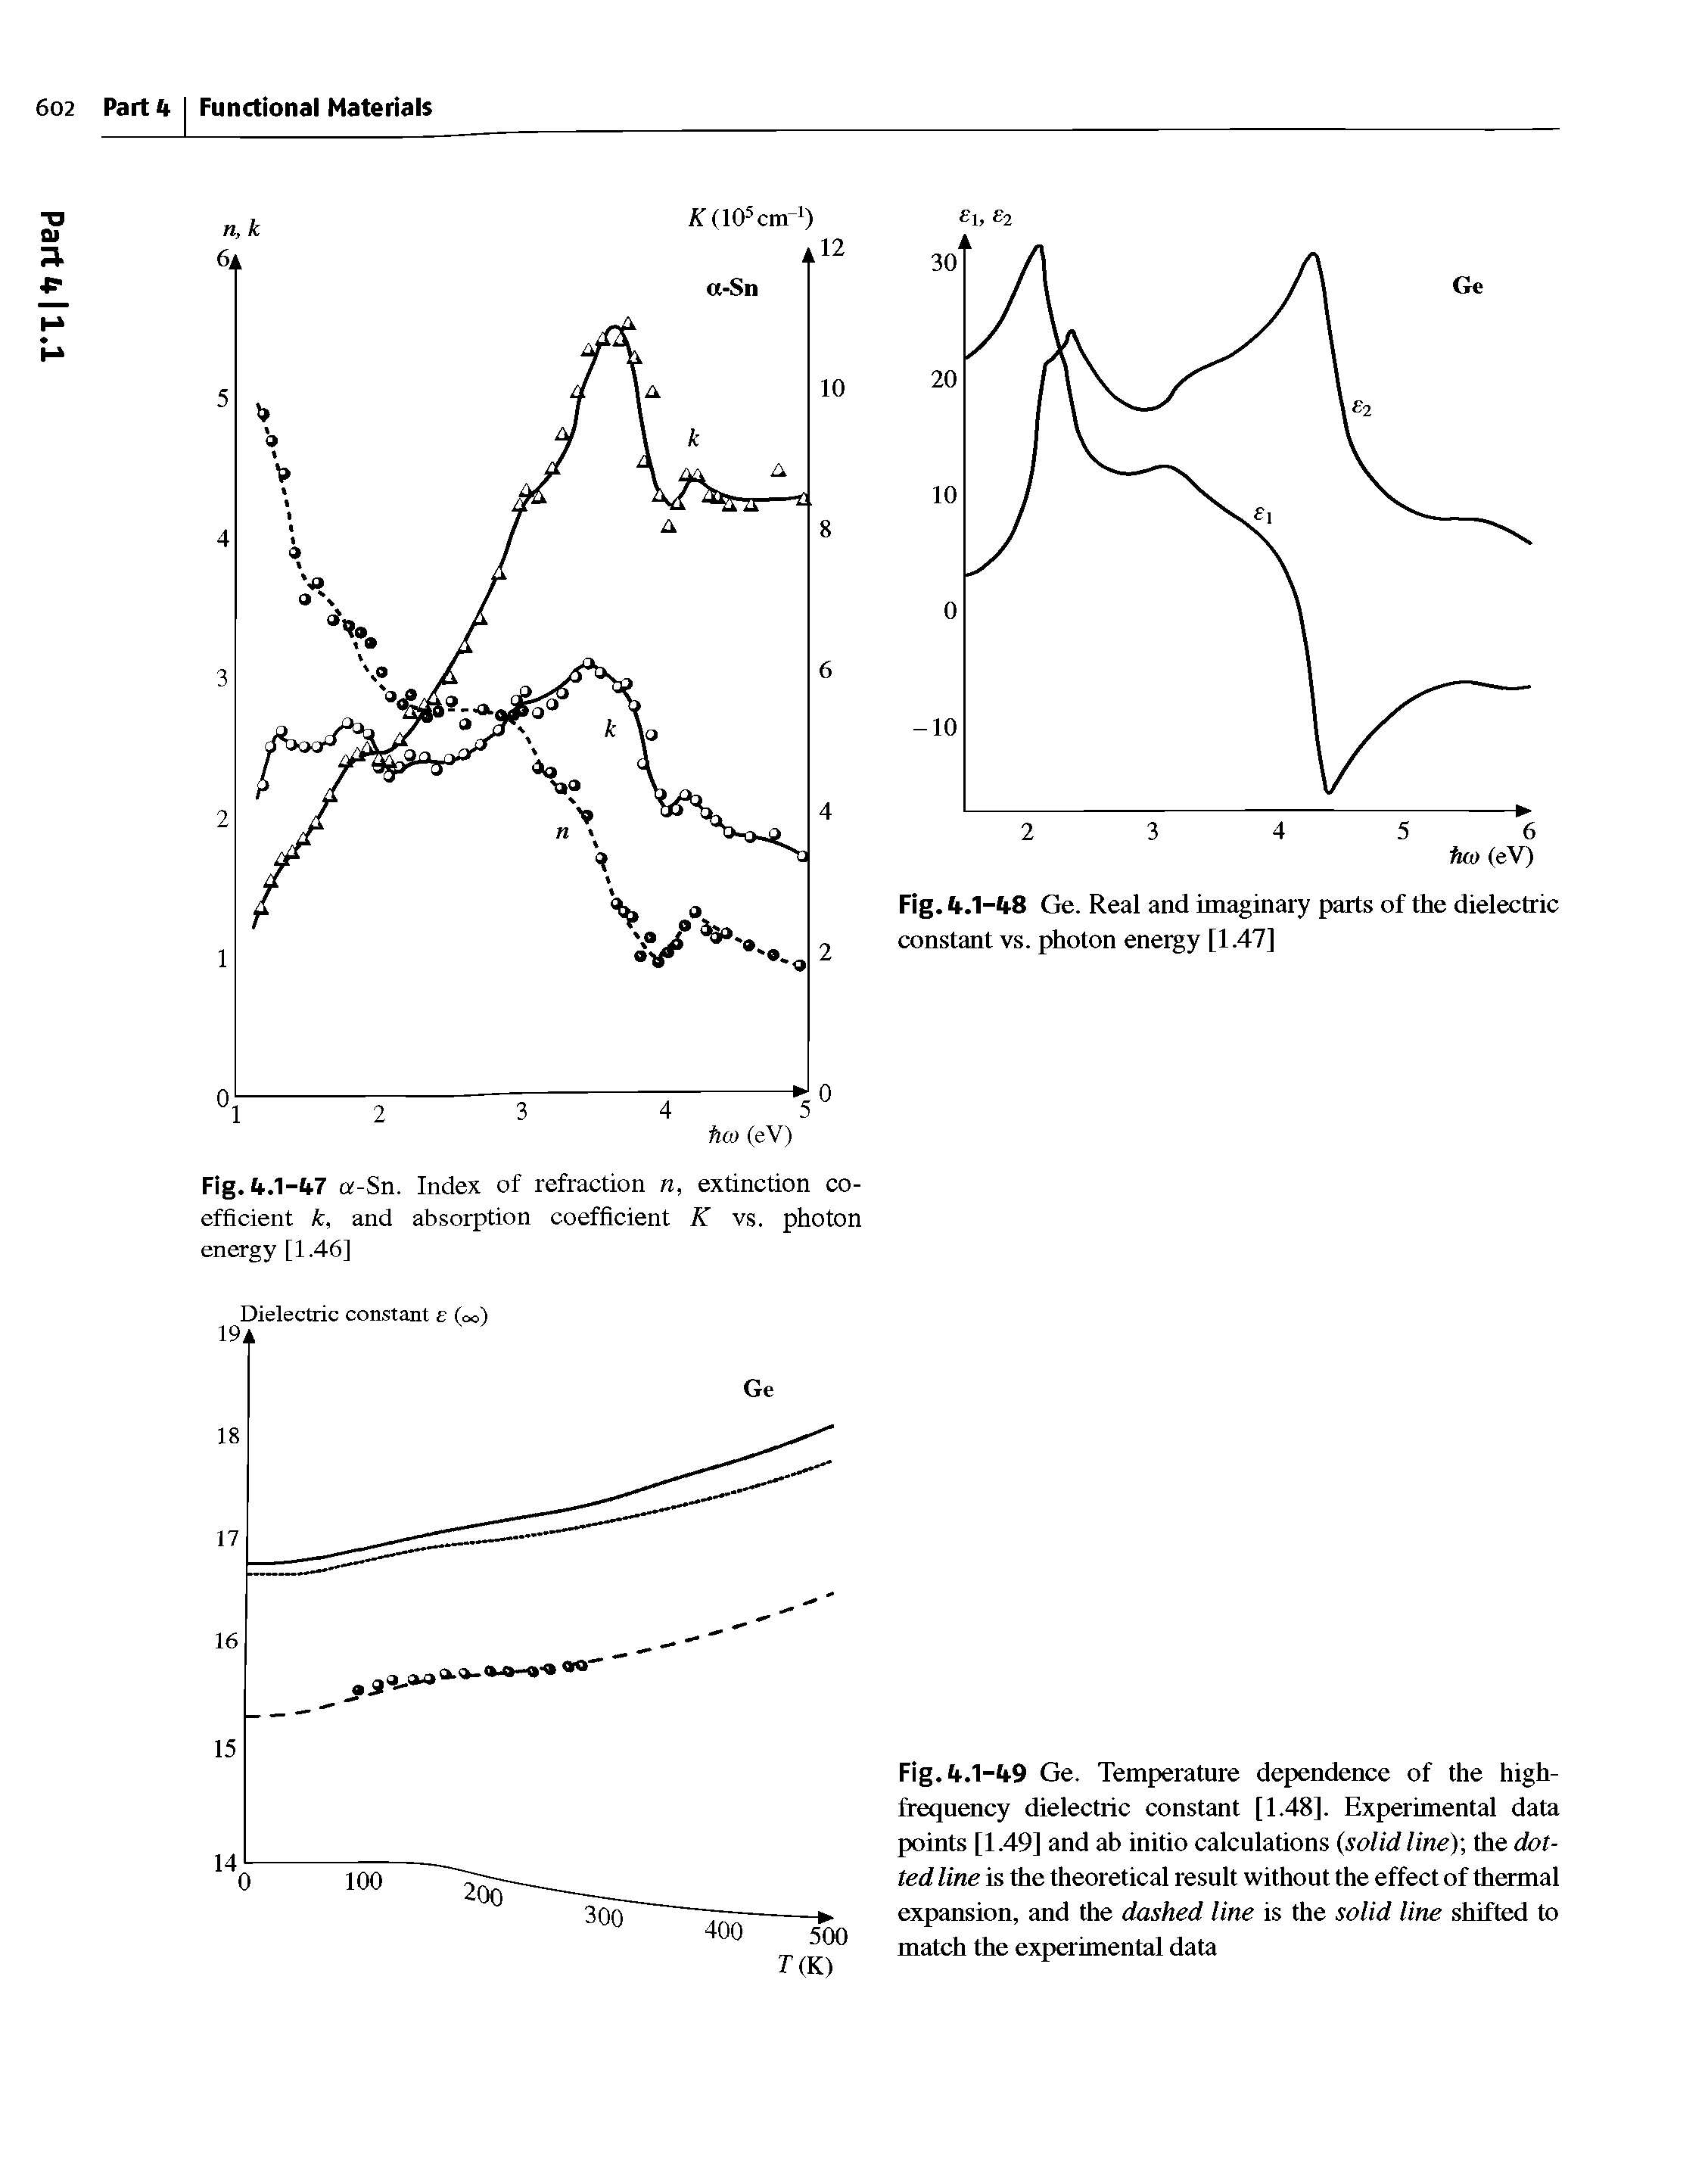 Fig. 4.1-49 Ge. Temperature dependence of the high-frequency dielectric constant [1.48]. Experimental data points [ 1.49] and ah initio calculations (solid line)-, the dotted line is the theoretical result without the effect of thermal expansion, and the dashed line is the solid line shifted to match the experimental data...